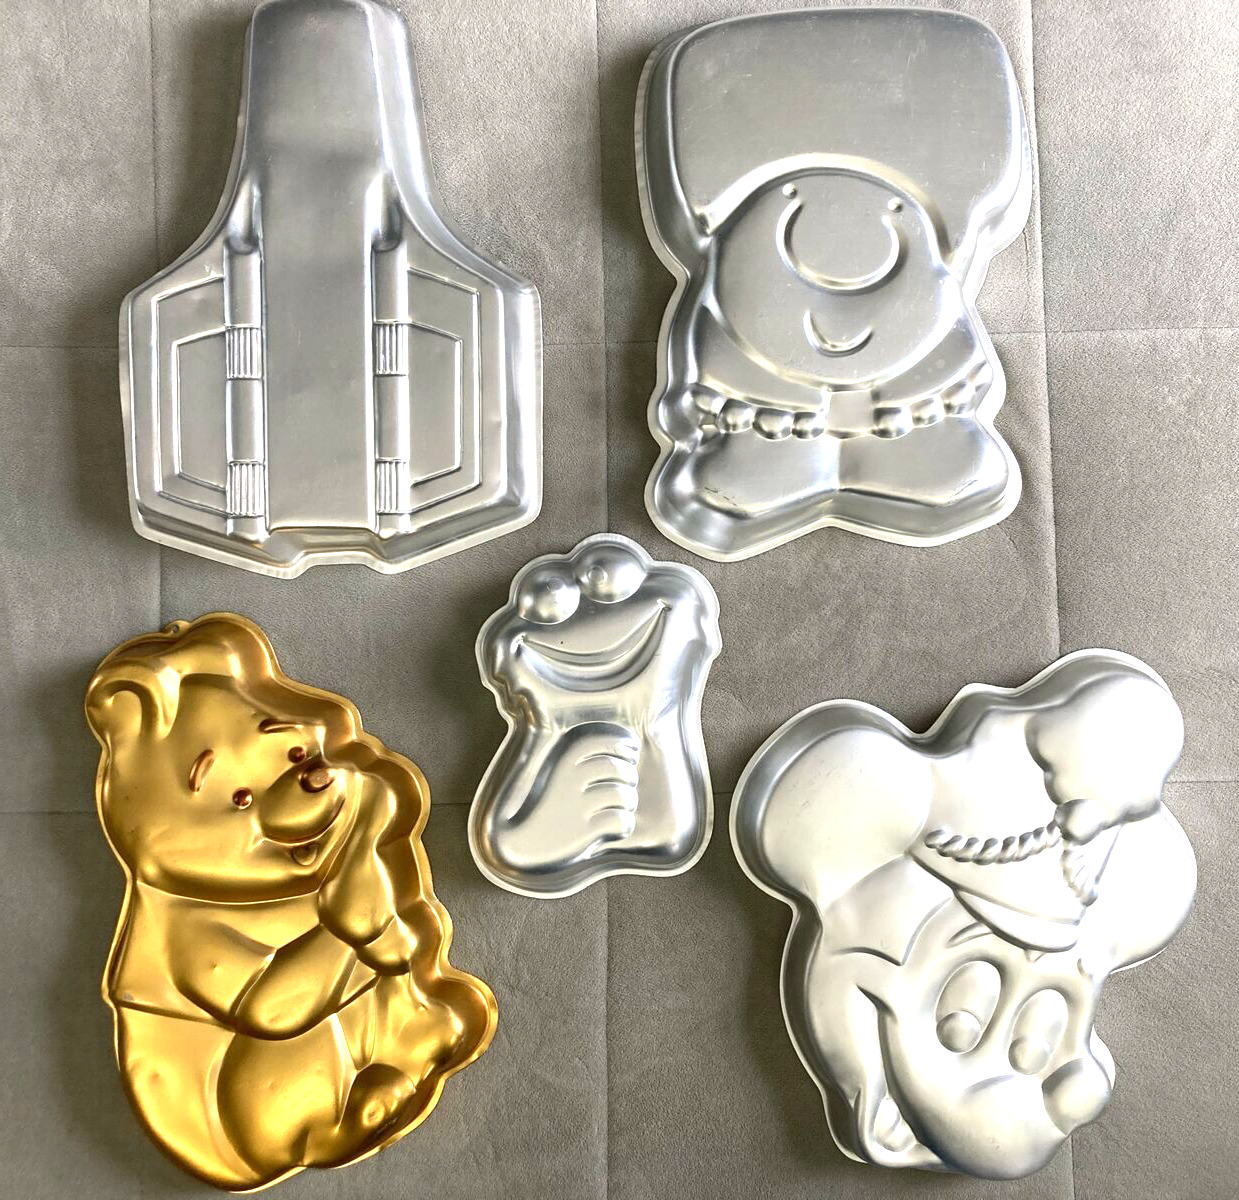 Vintage Lot 5 Wilton 3D Cake Pan Molds Star Wars, Winnie the Pooh, Micky Mouse